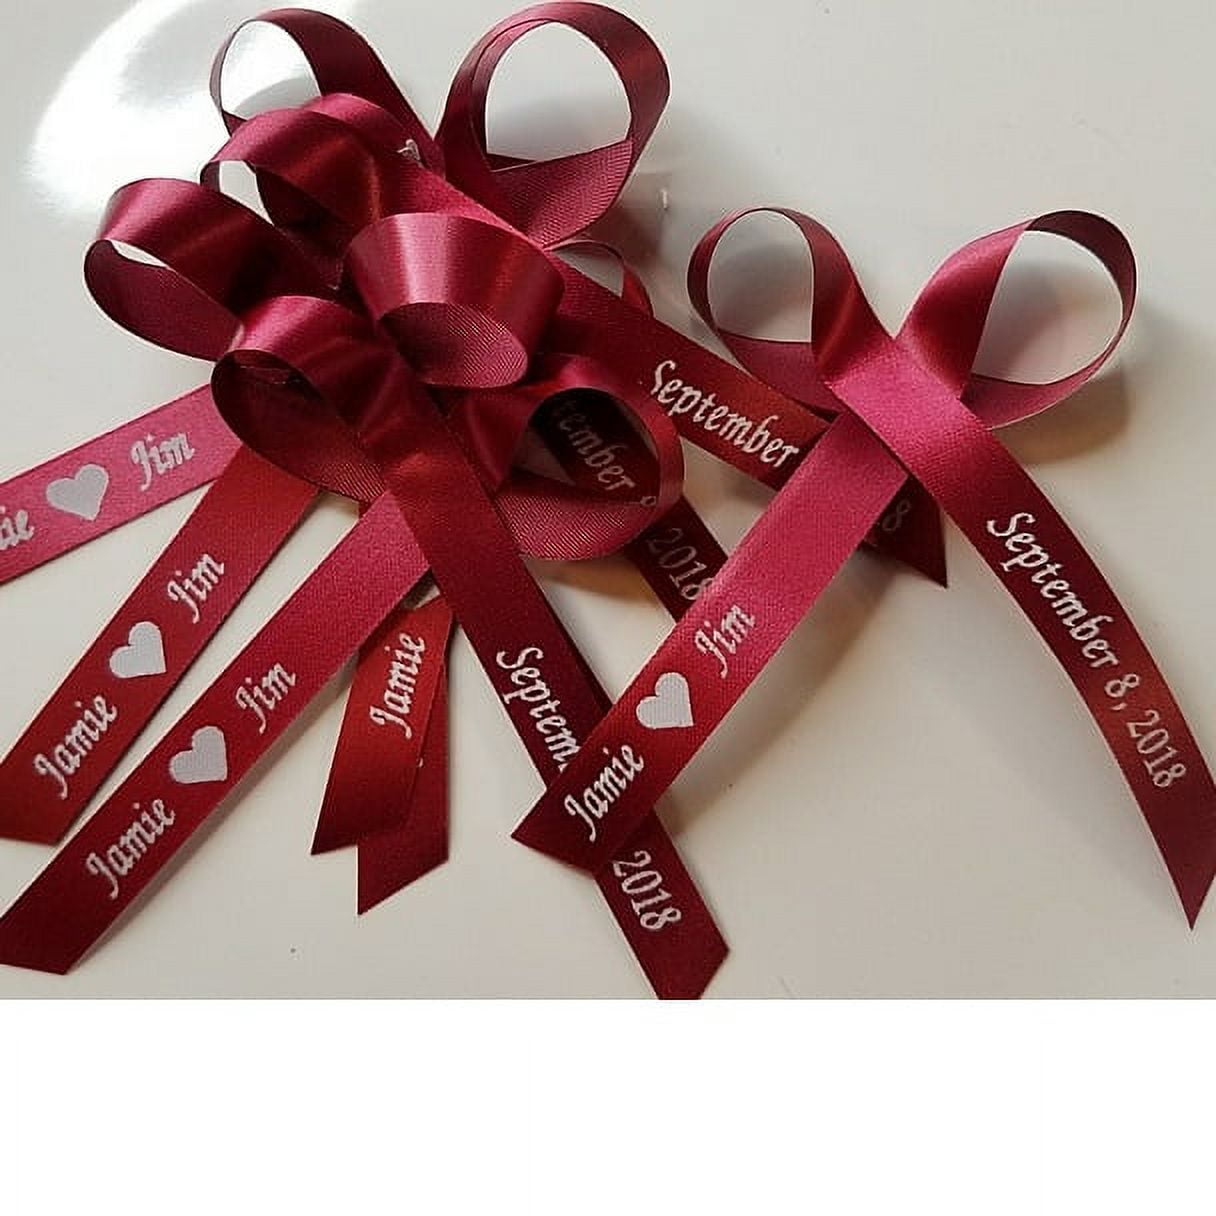 QIIBURR Ribbons and Bows for Gift Wrapping Mothers Day Gift